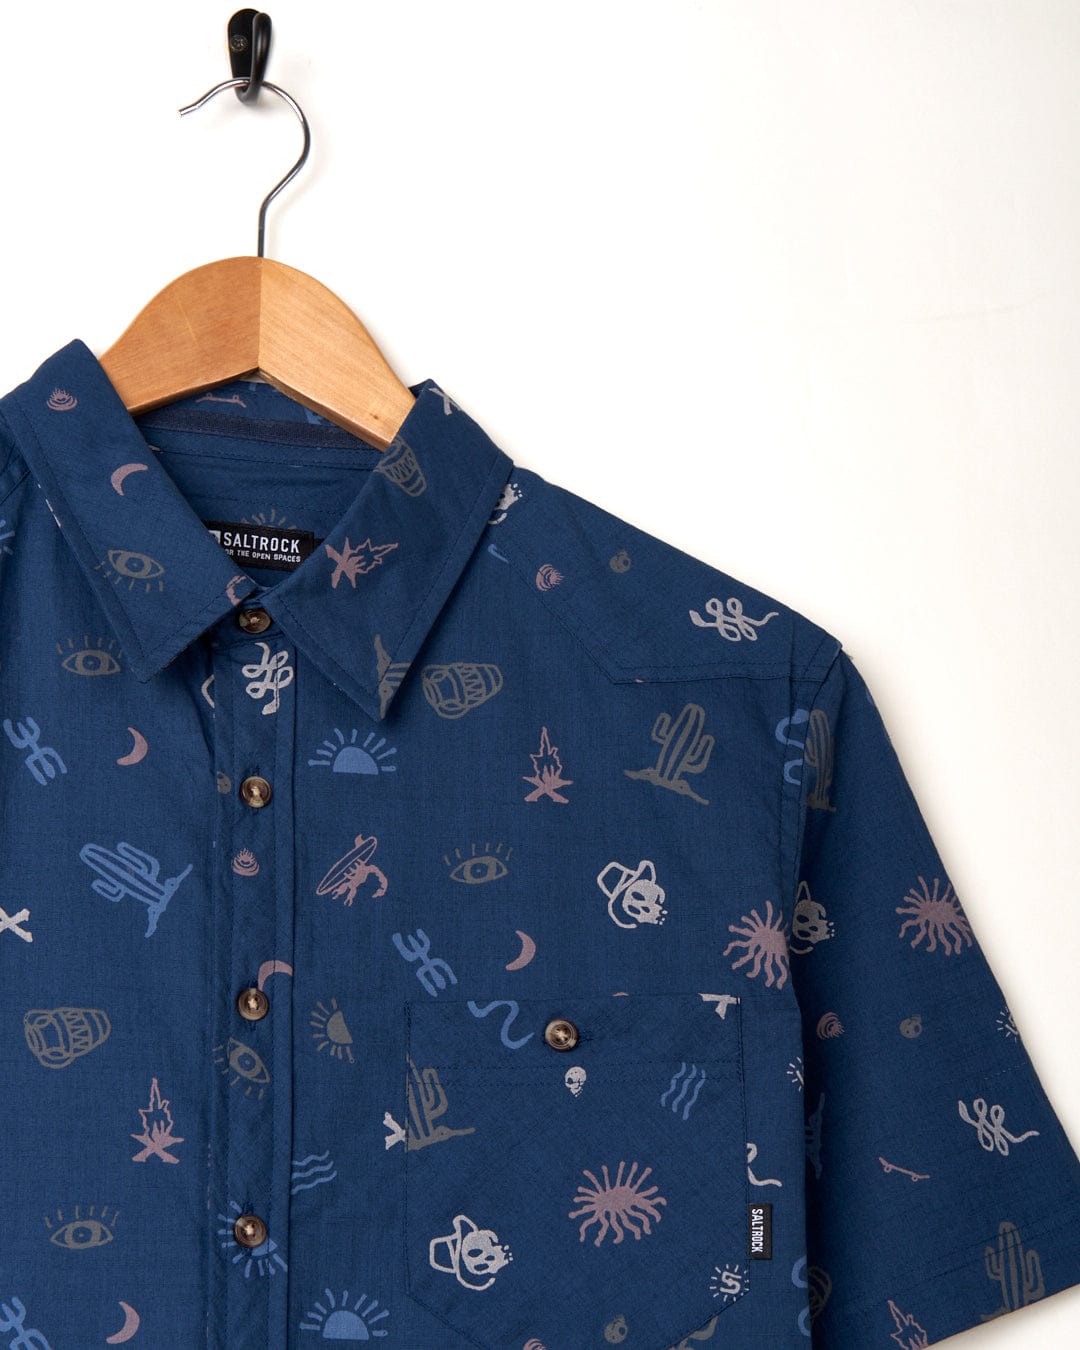 A Saltrock Last Stop - Mens Short Sleeve Shirt - Blue with cactus prints on it.